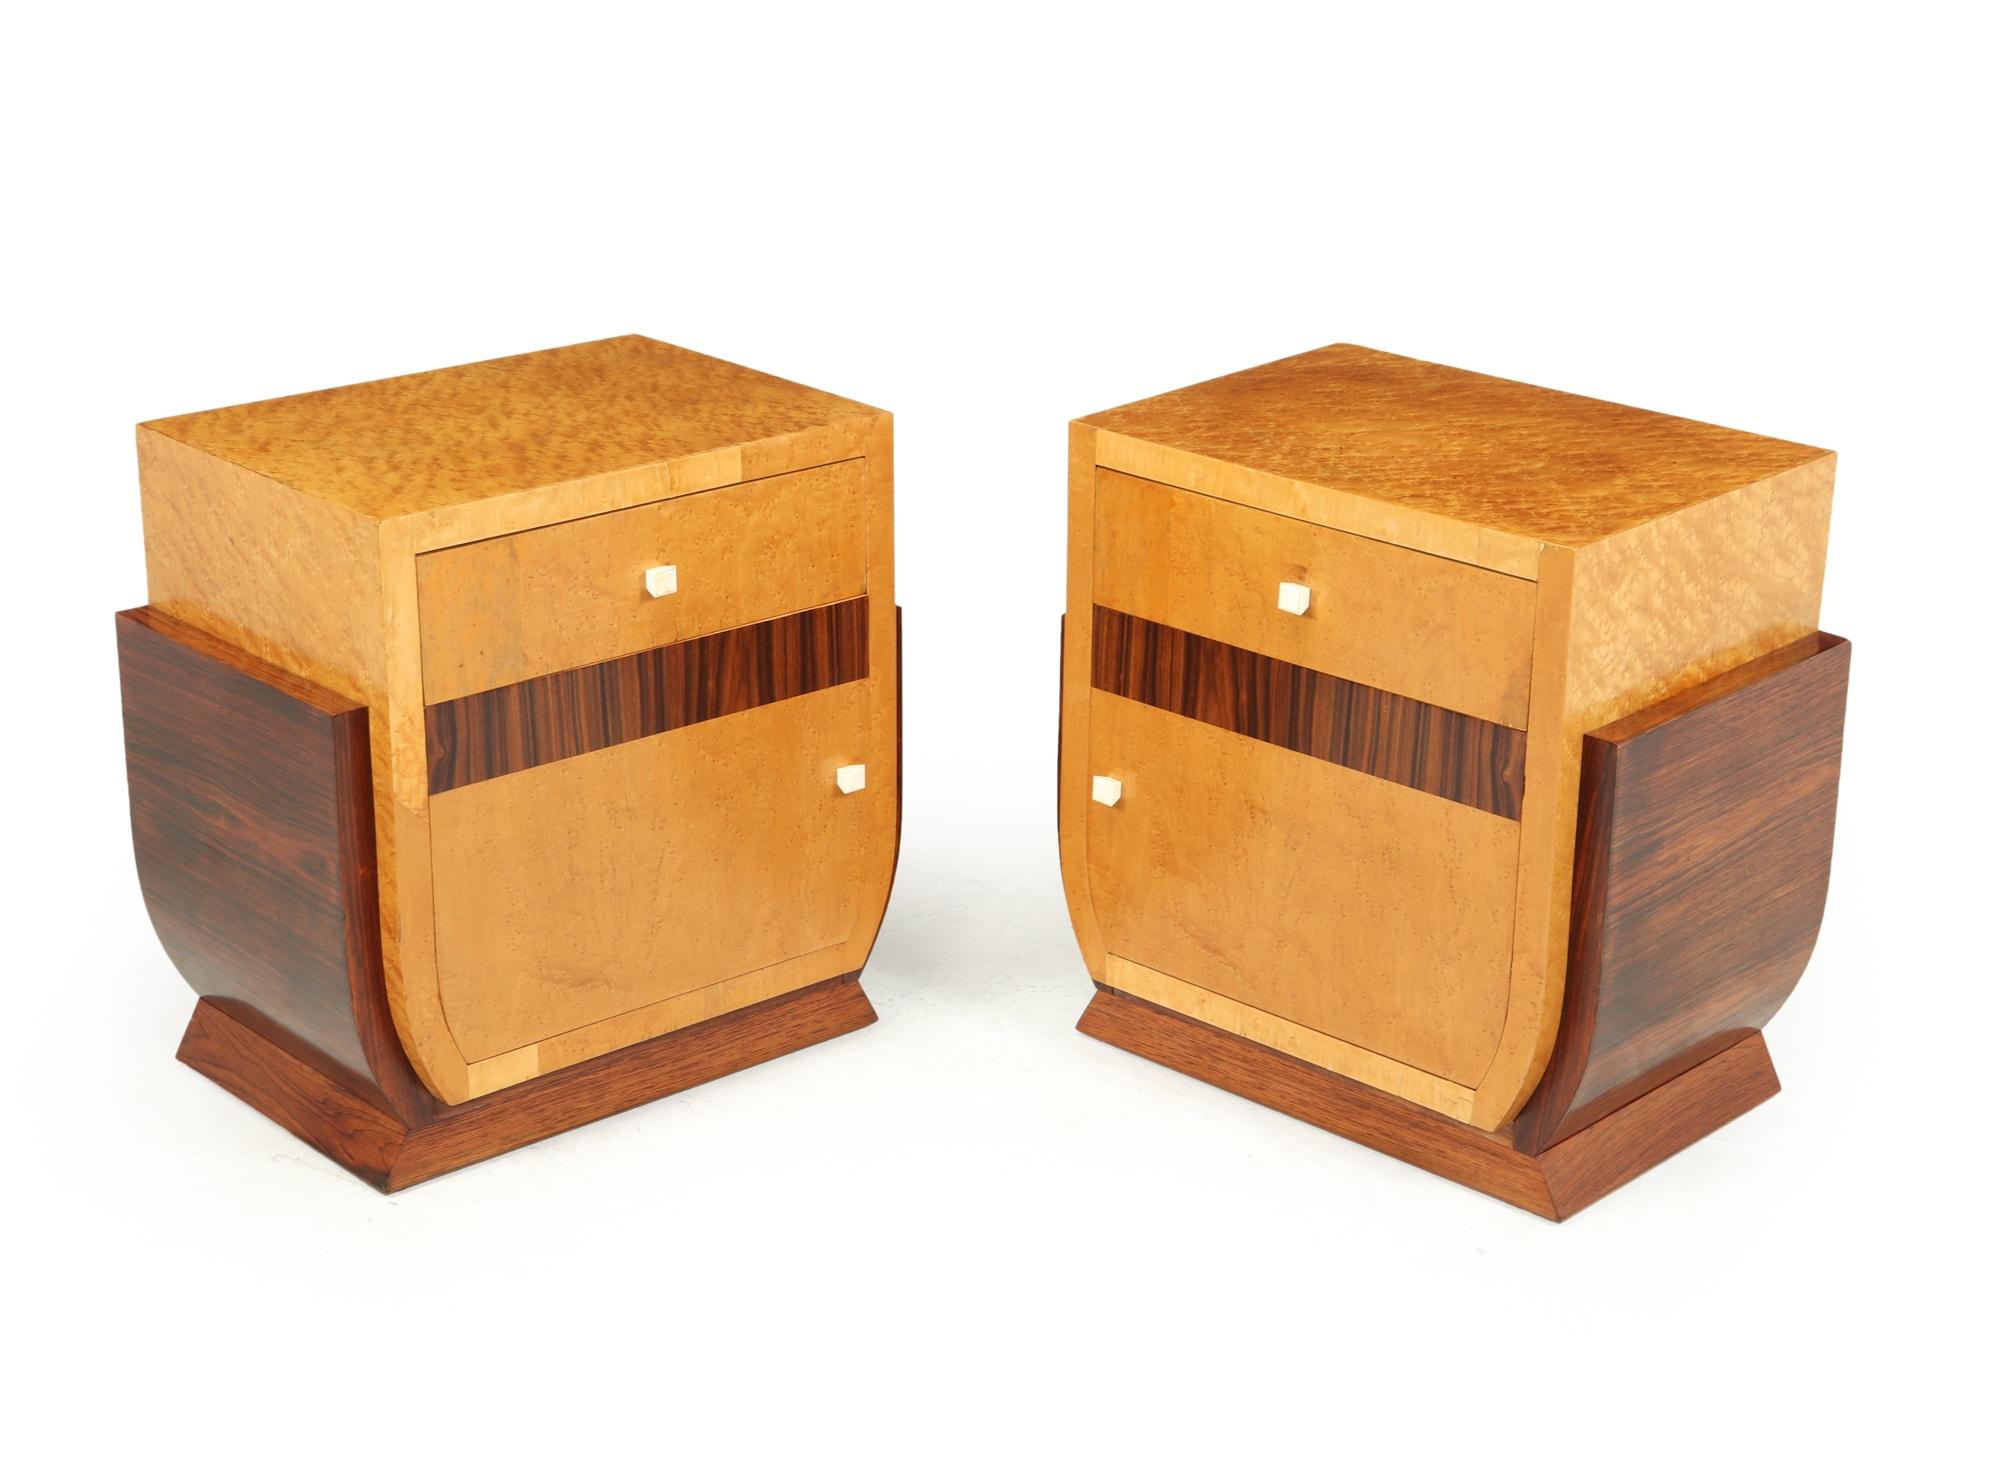 A pair of French Art Deco bedside cabinets produced in the 1930s from oak and veneered in birds-eye maple and rosewood, they are in lovely condition throughout and have been fully polished

Age: 1930

Style: Art Deco

Material: Birds-eye maple